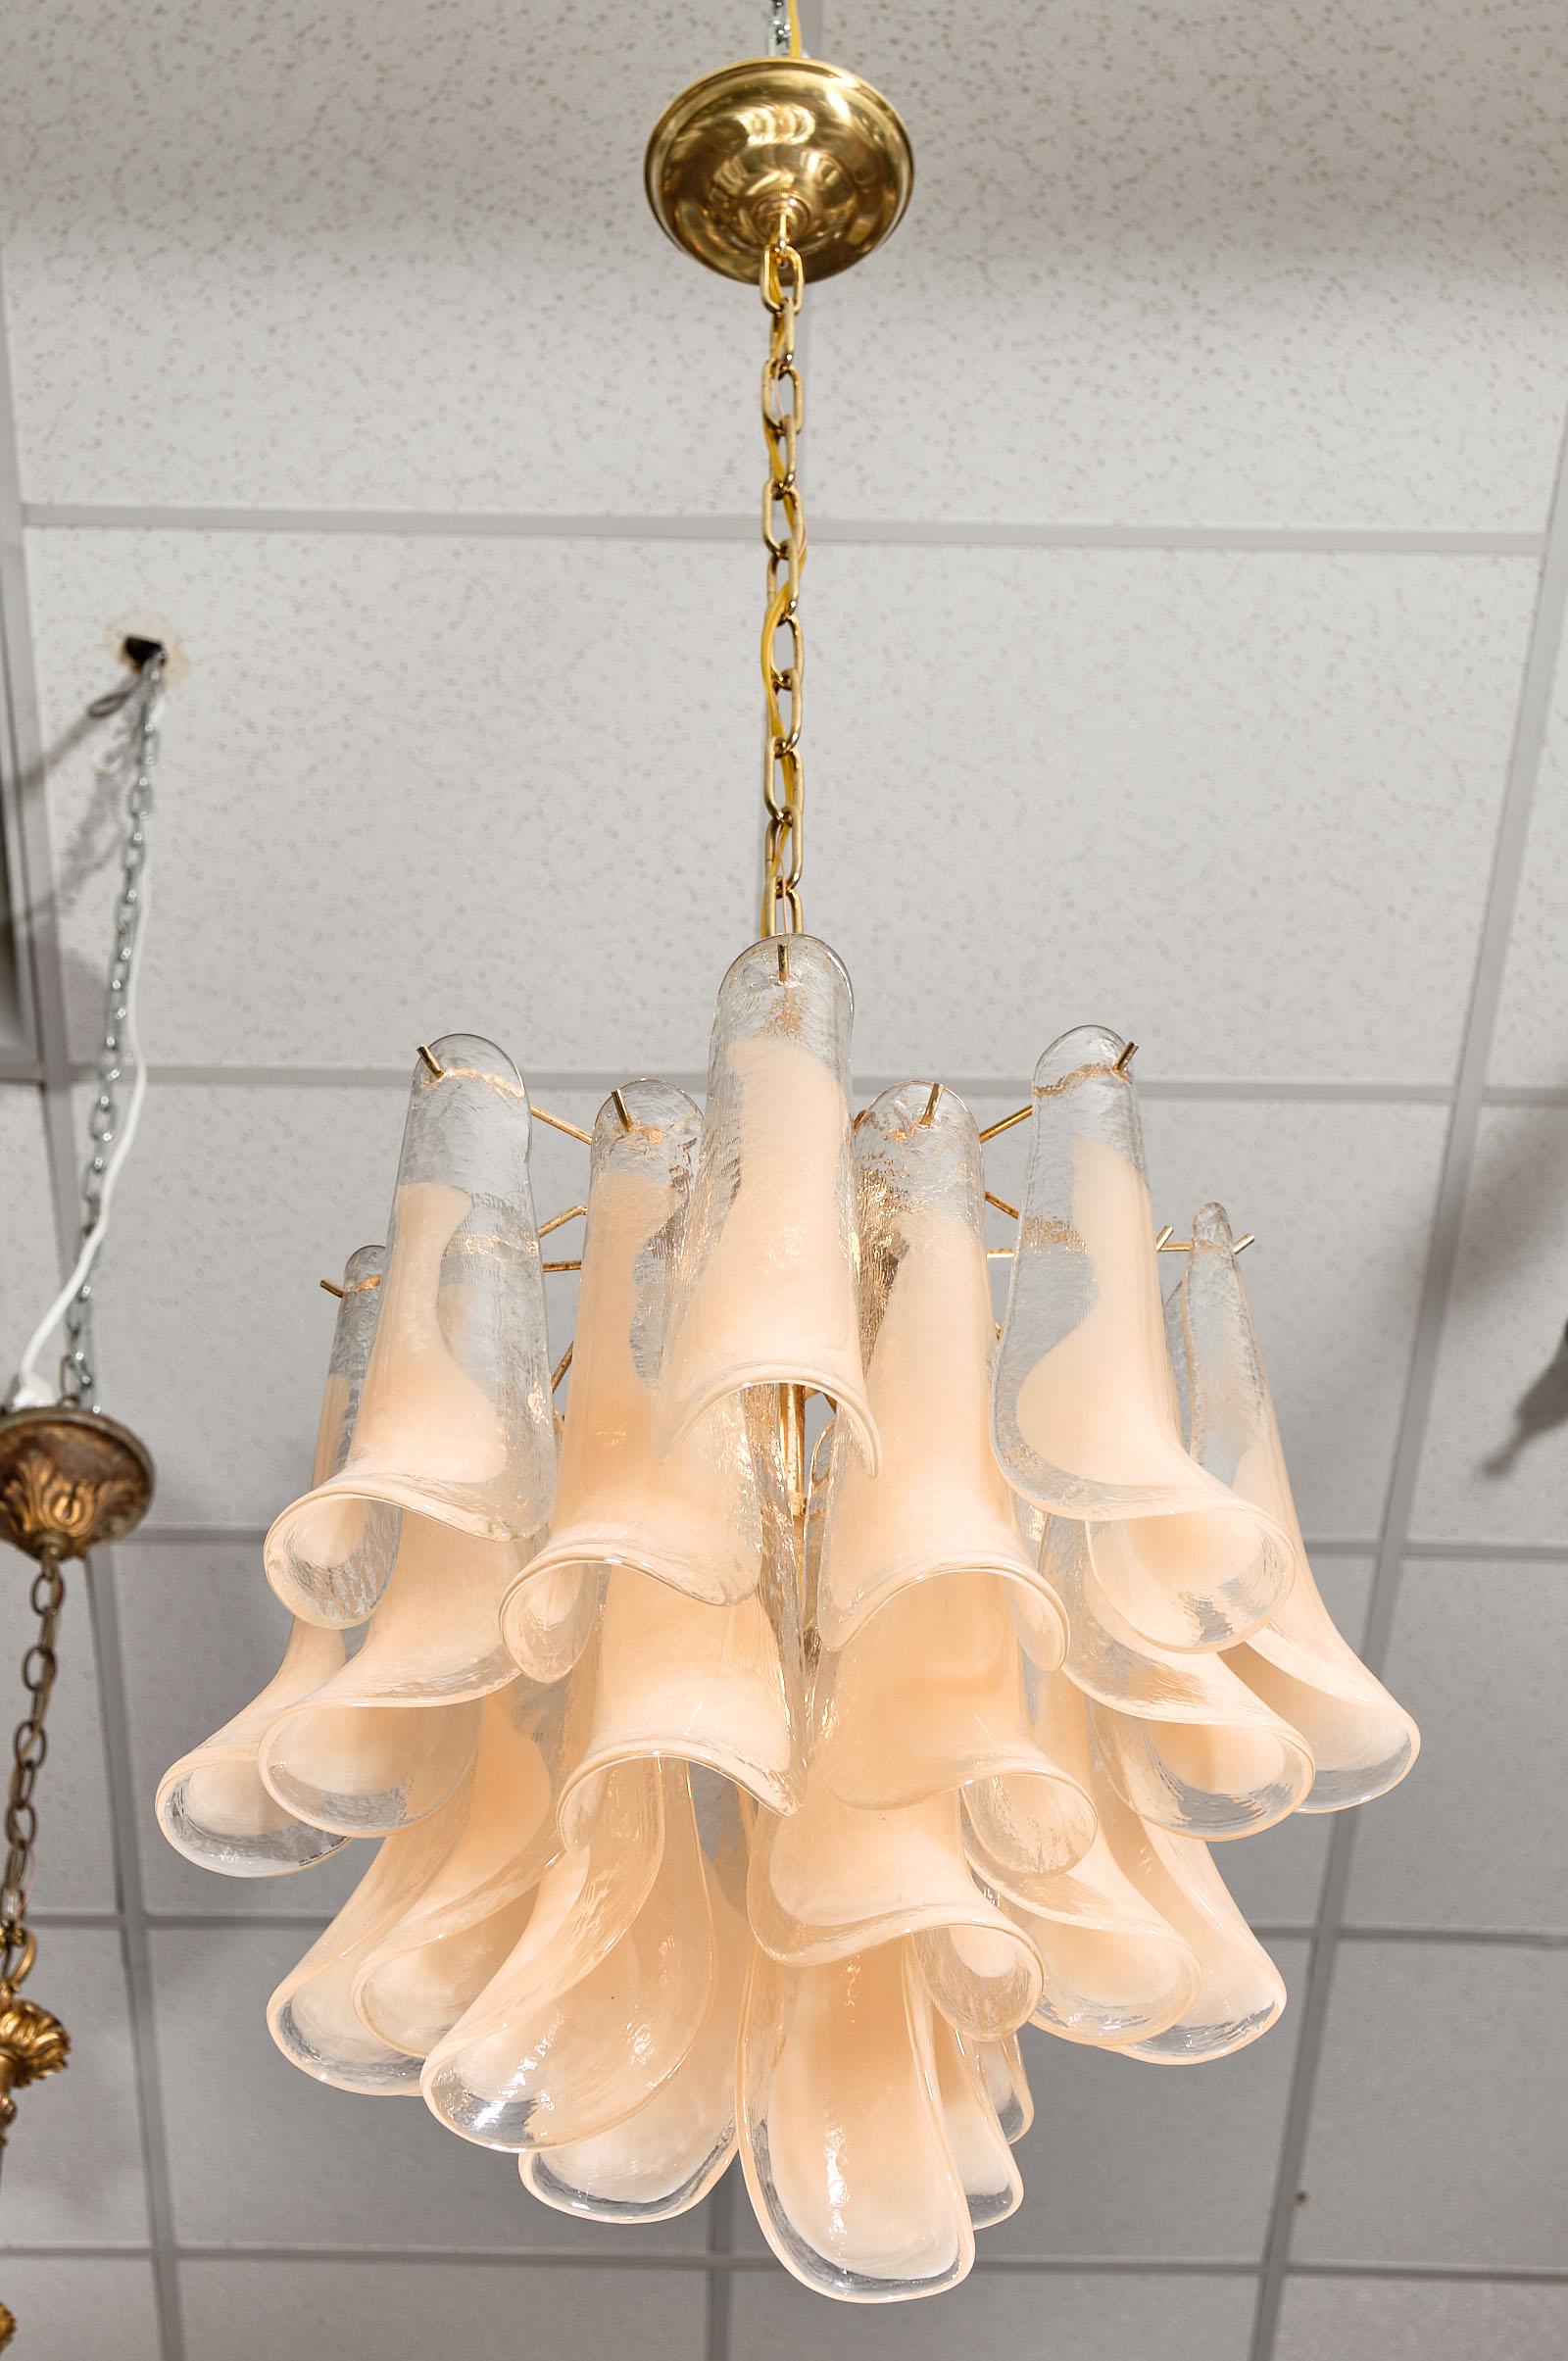 Peach Murano Glass “Selle” Chandeliers 1